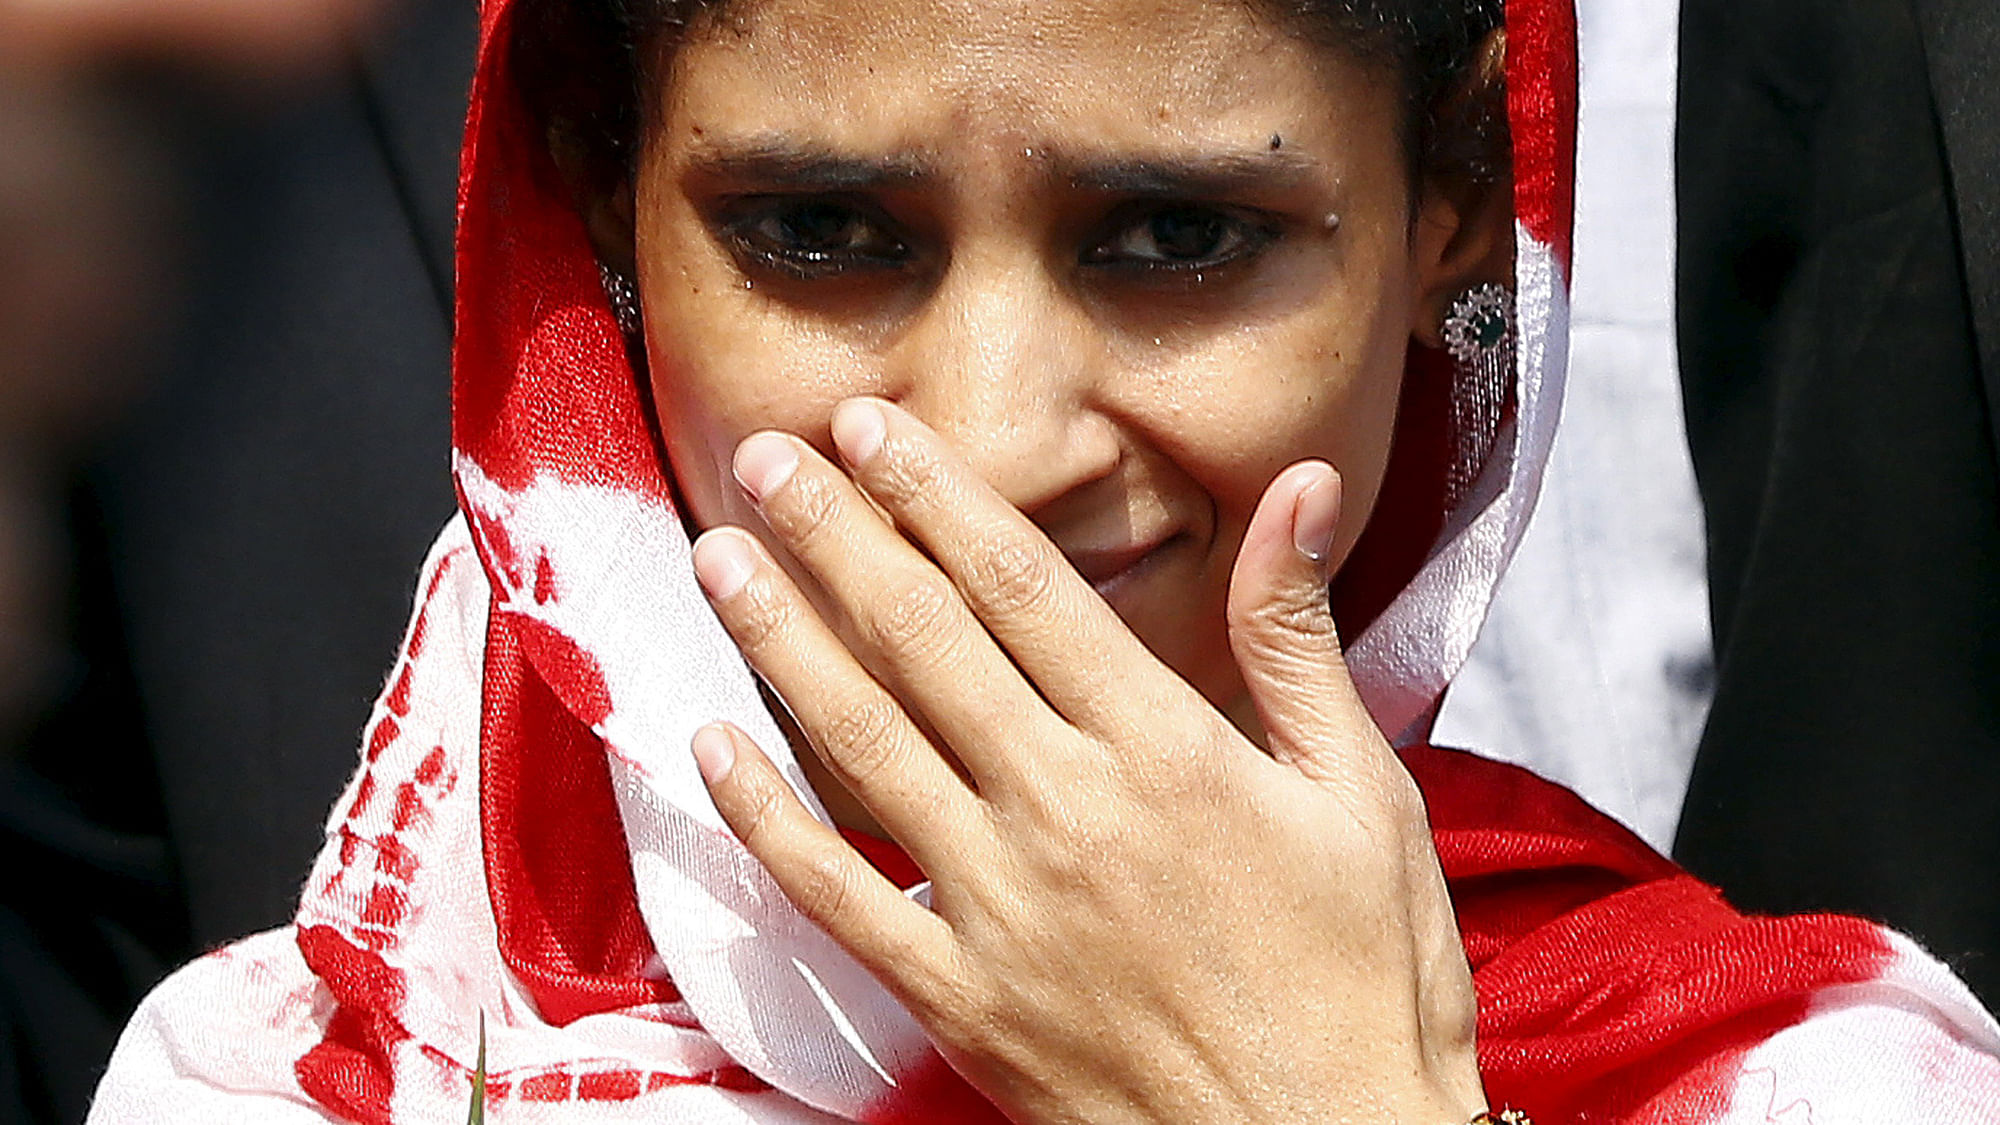 India gives a warm welcome to Geeta. (Photo: Reuters)